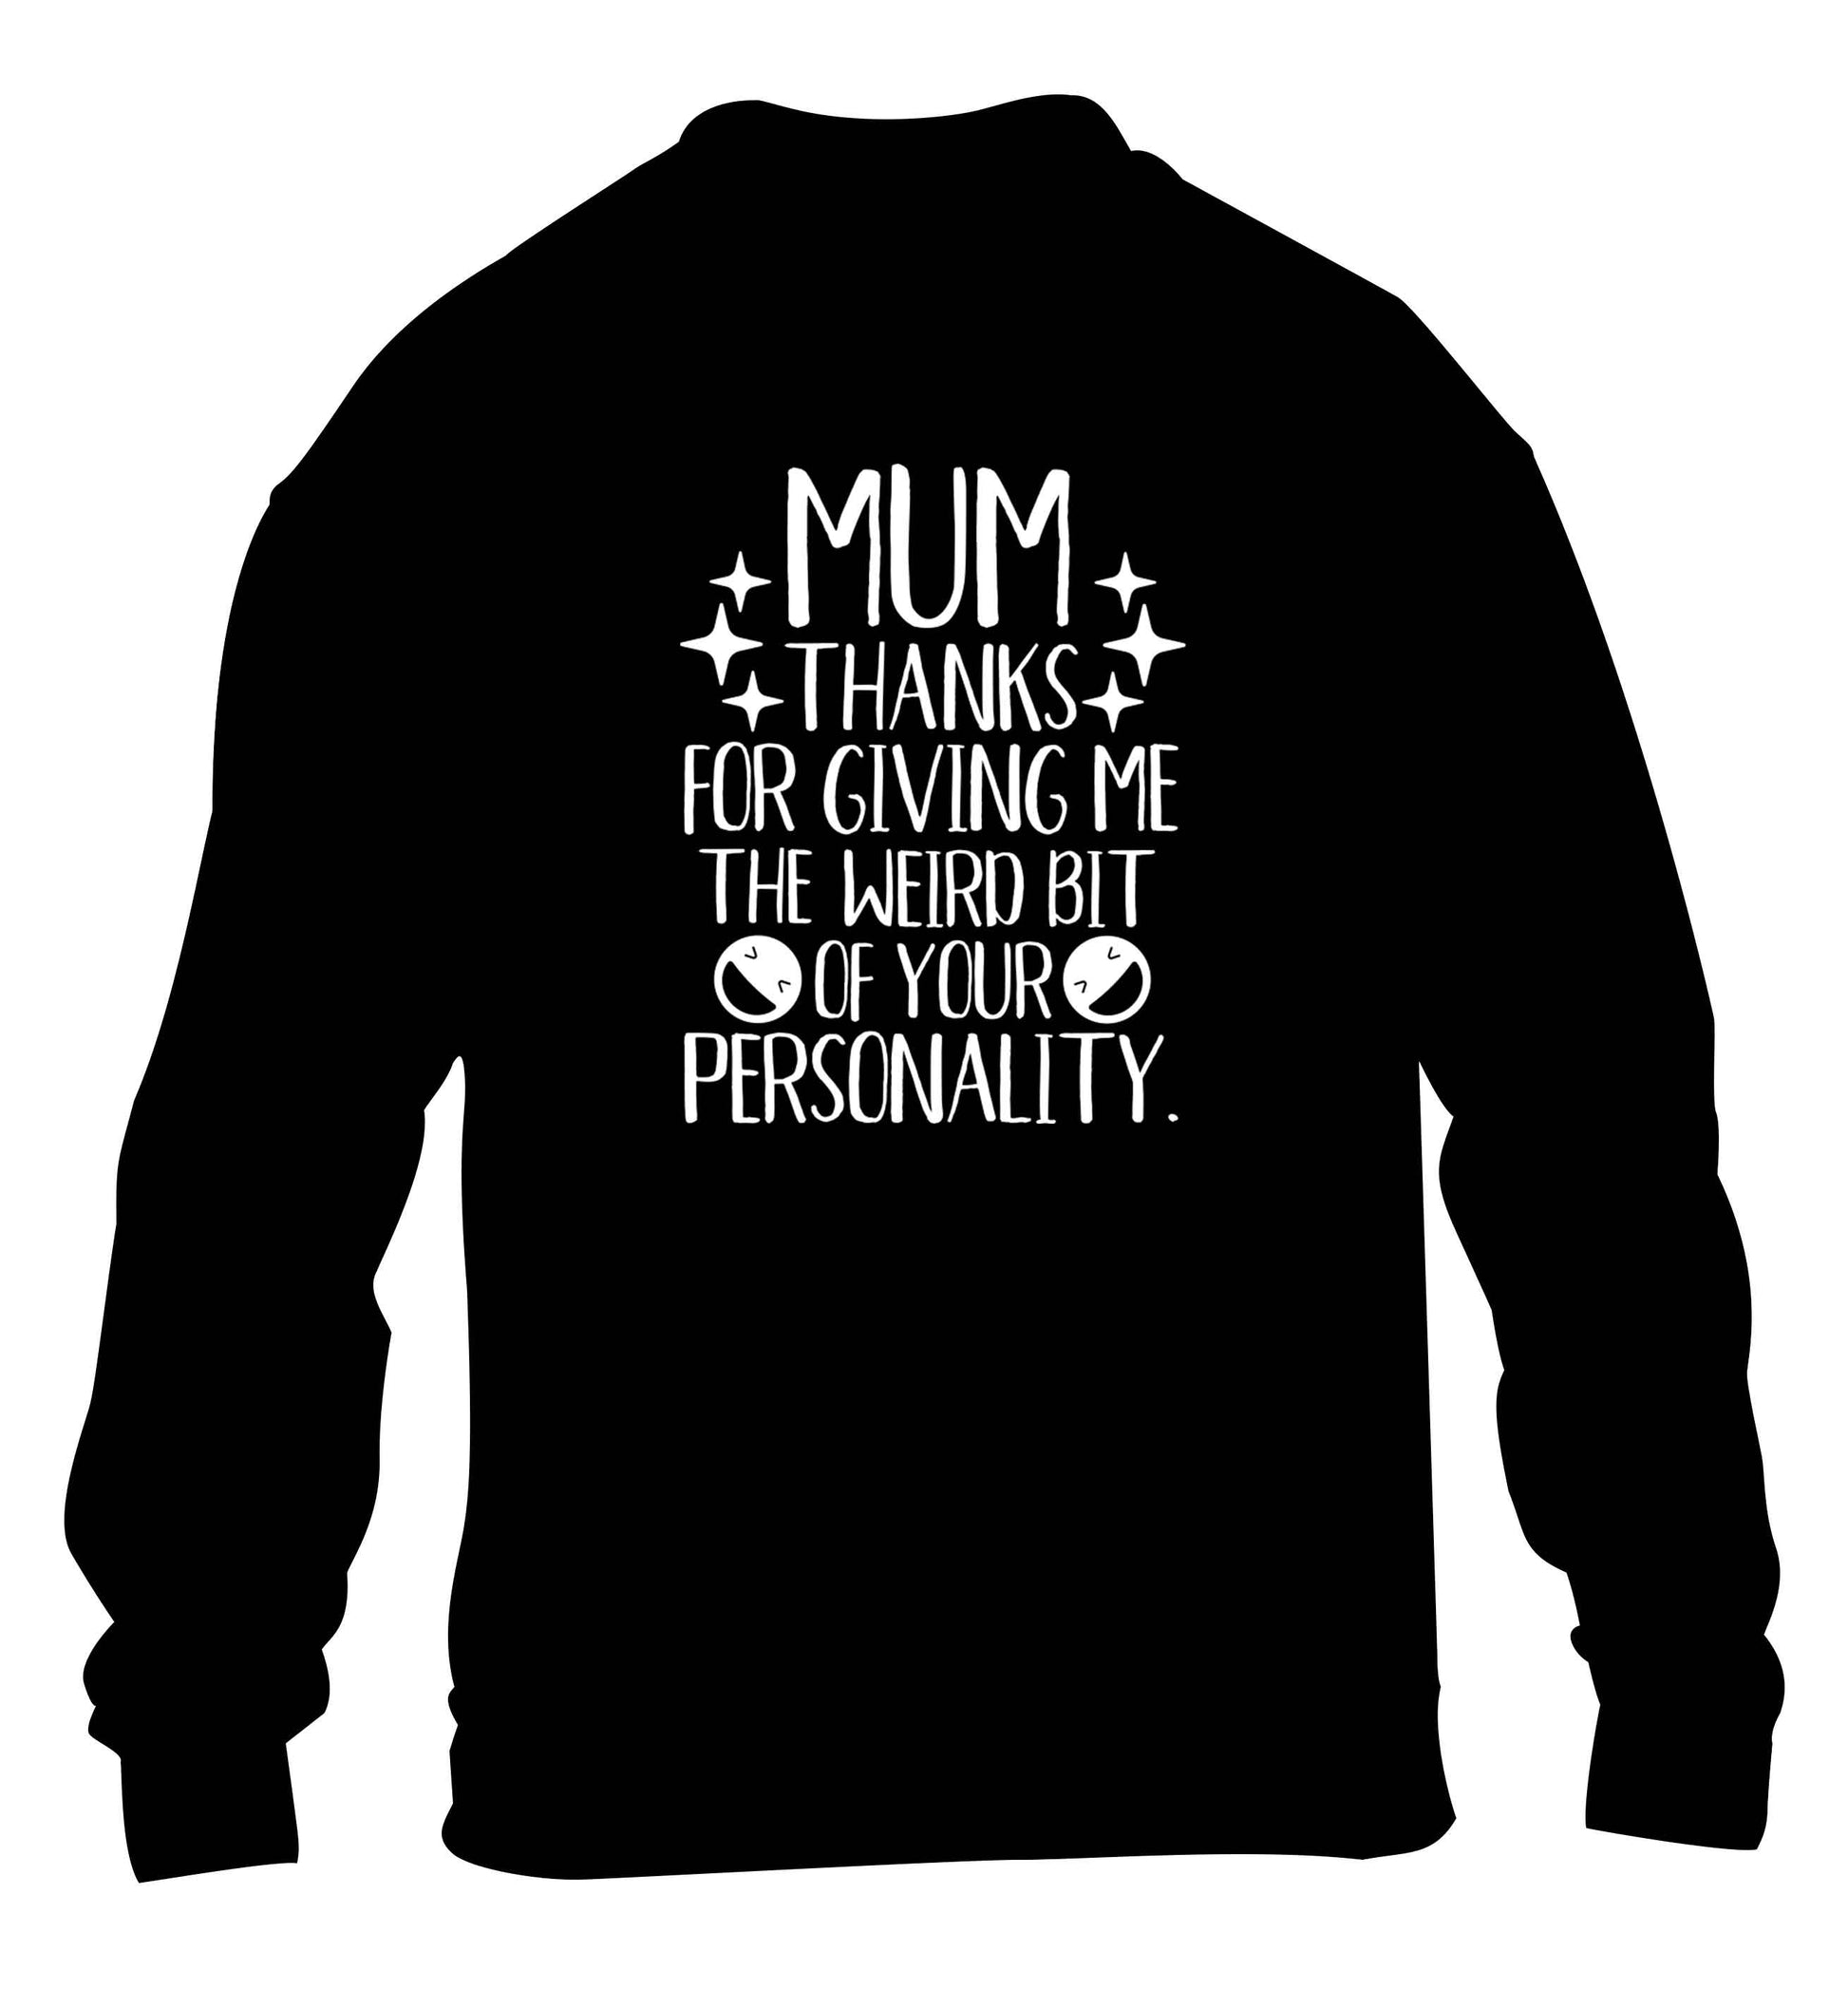 Mum, I love you more than halloumi and if you know me at all you know how deep that is children's black sweater 12-13 Years